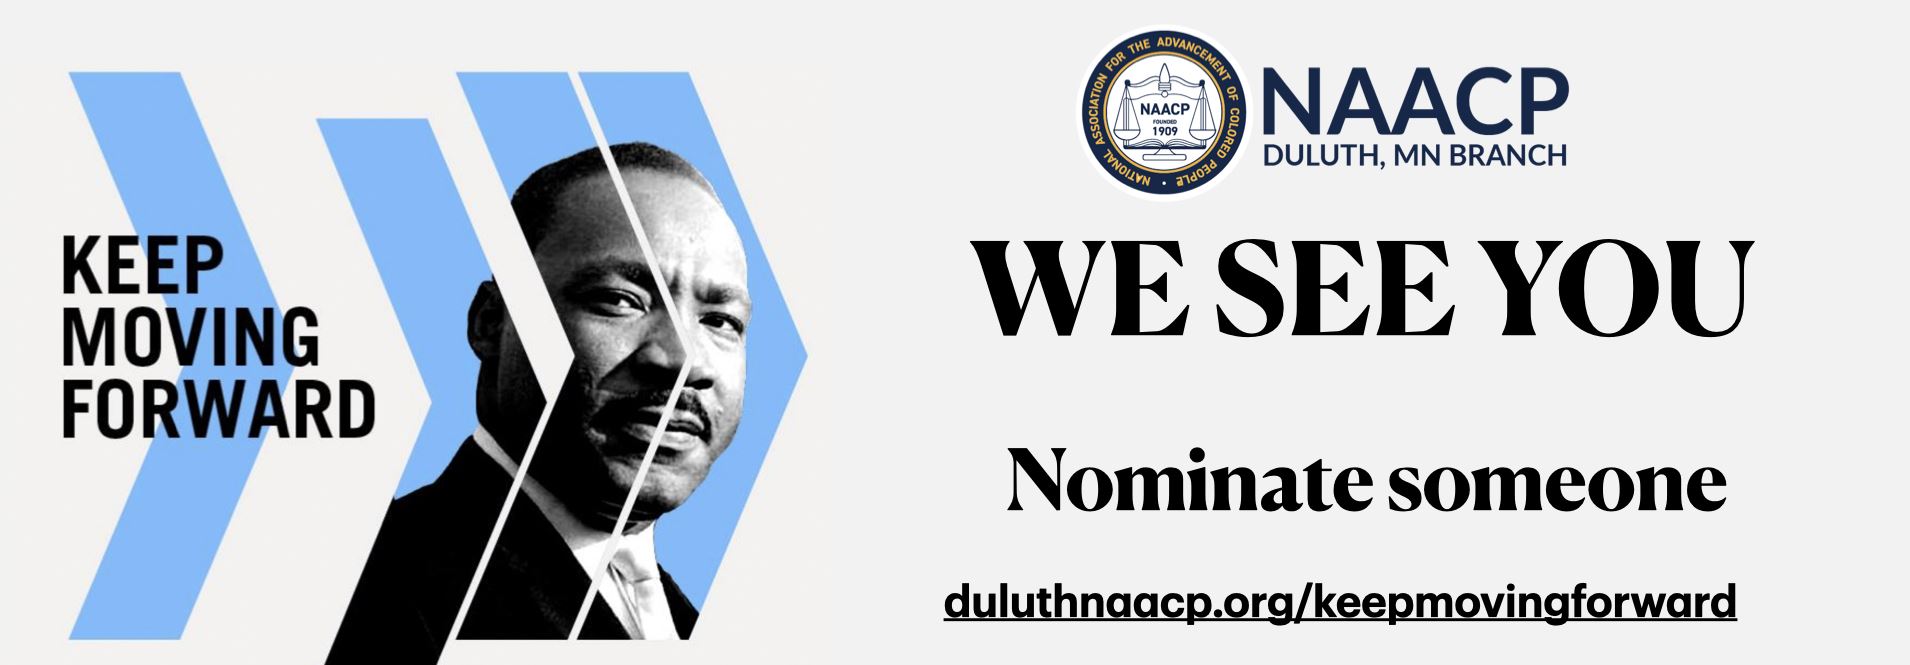 Banner for Wee See You - Nominate Someone with image of Dr. King